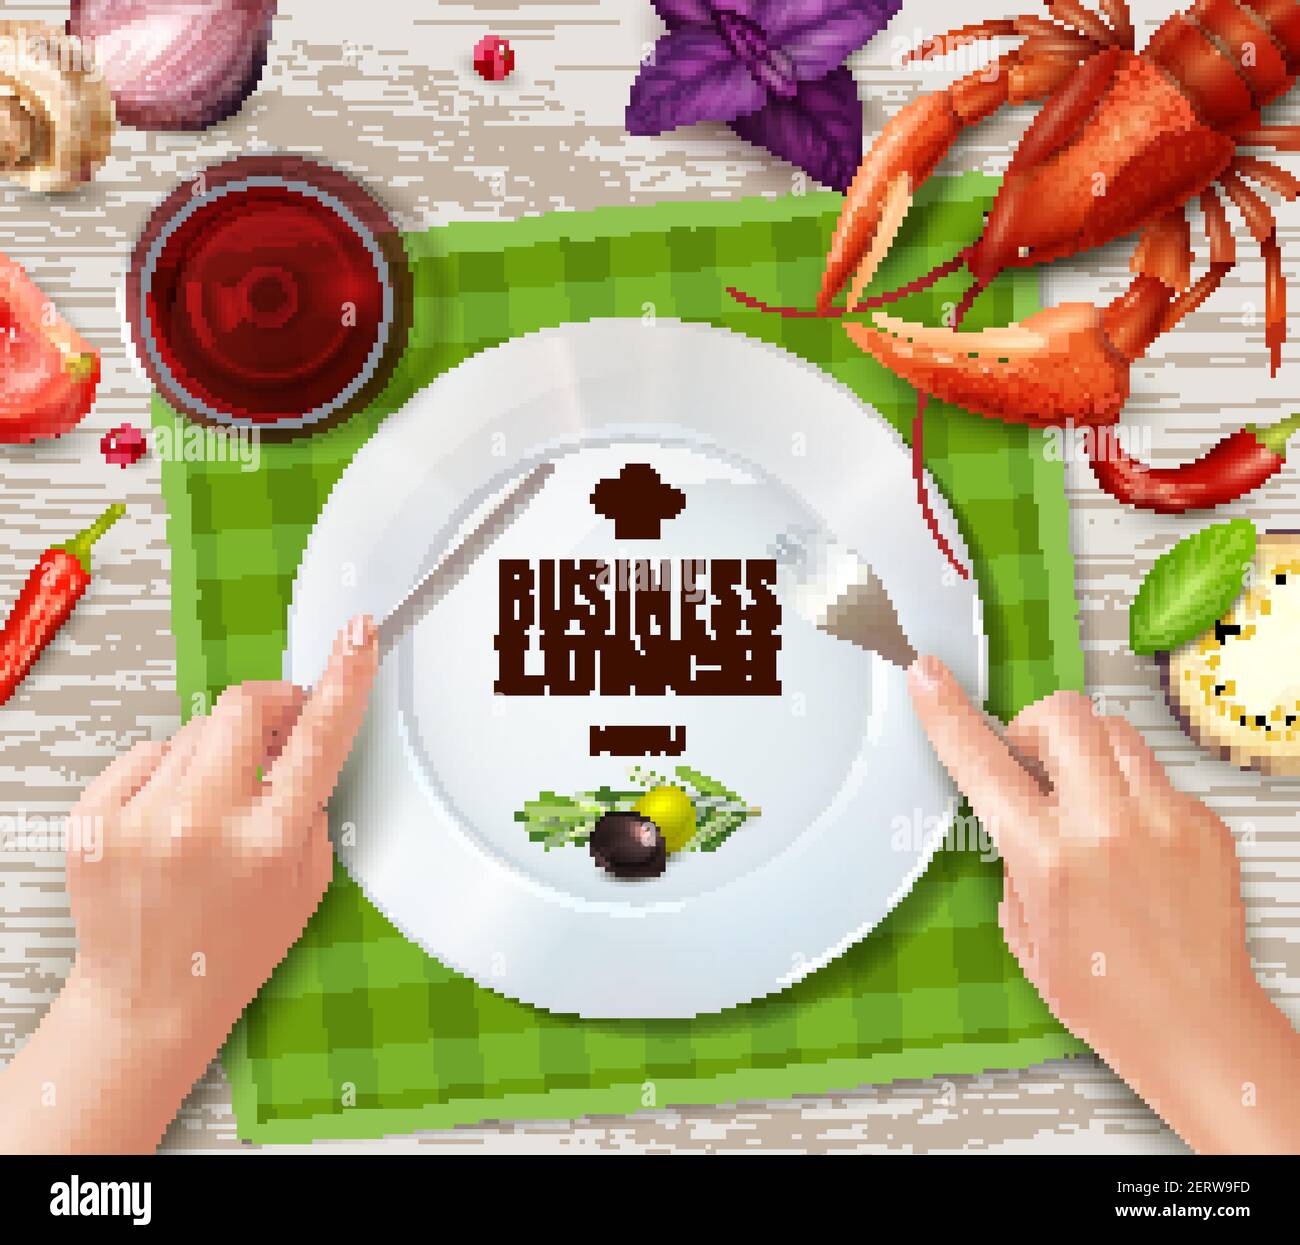 Using cutlery properly top view plate lobster saus and hands holding fork and knife realistic vector illustration Stock Vector